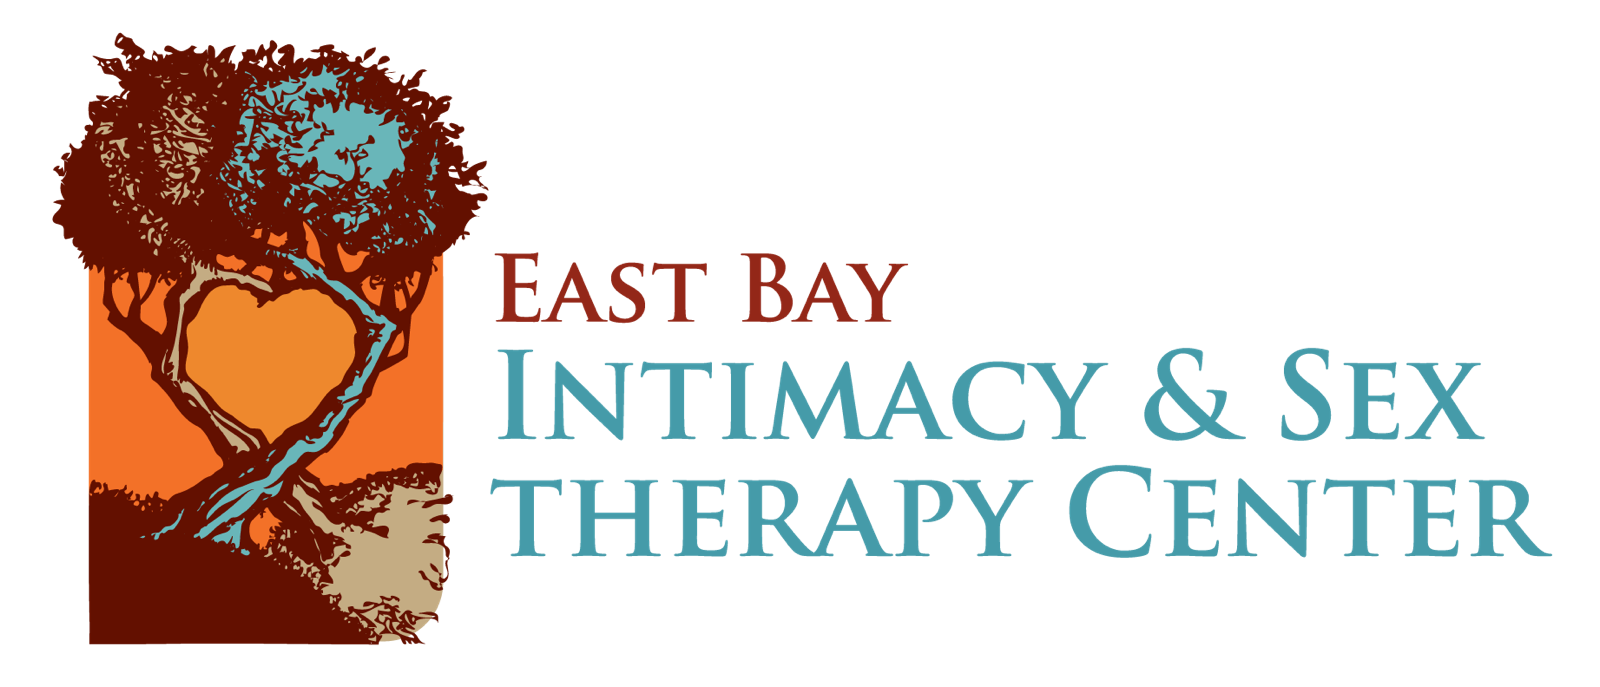 East Bay Intimacy &amp; Sex Therapy Centers: Leading Sex &amp; Couples Therapists in SF Bay Area (Over 40 Locations)